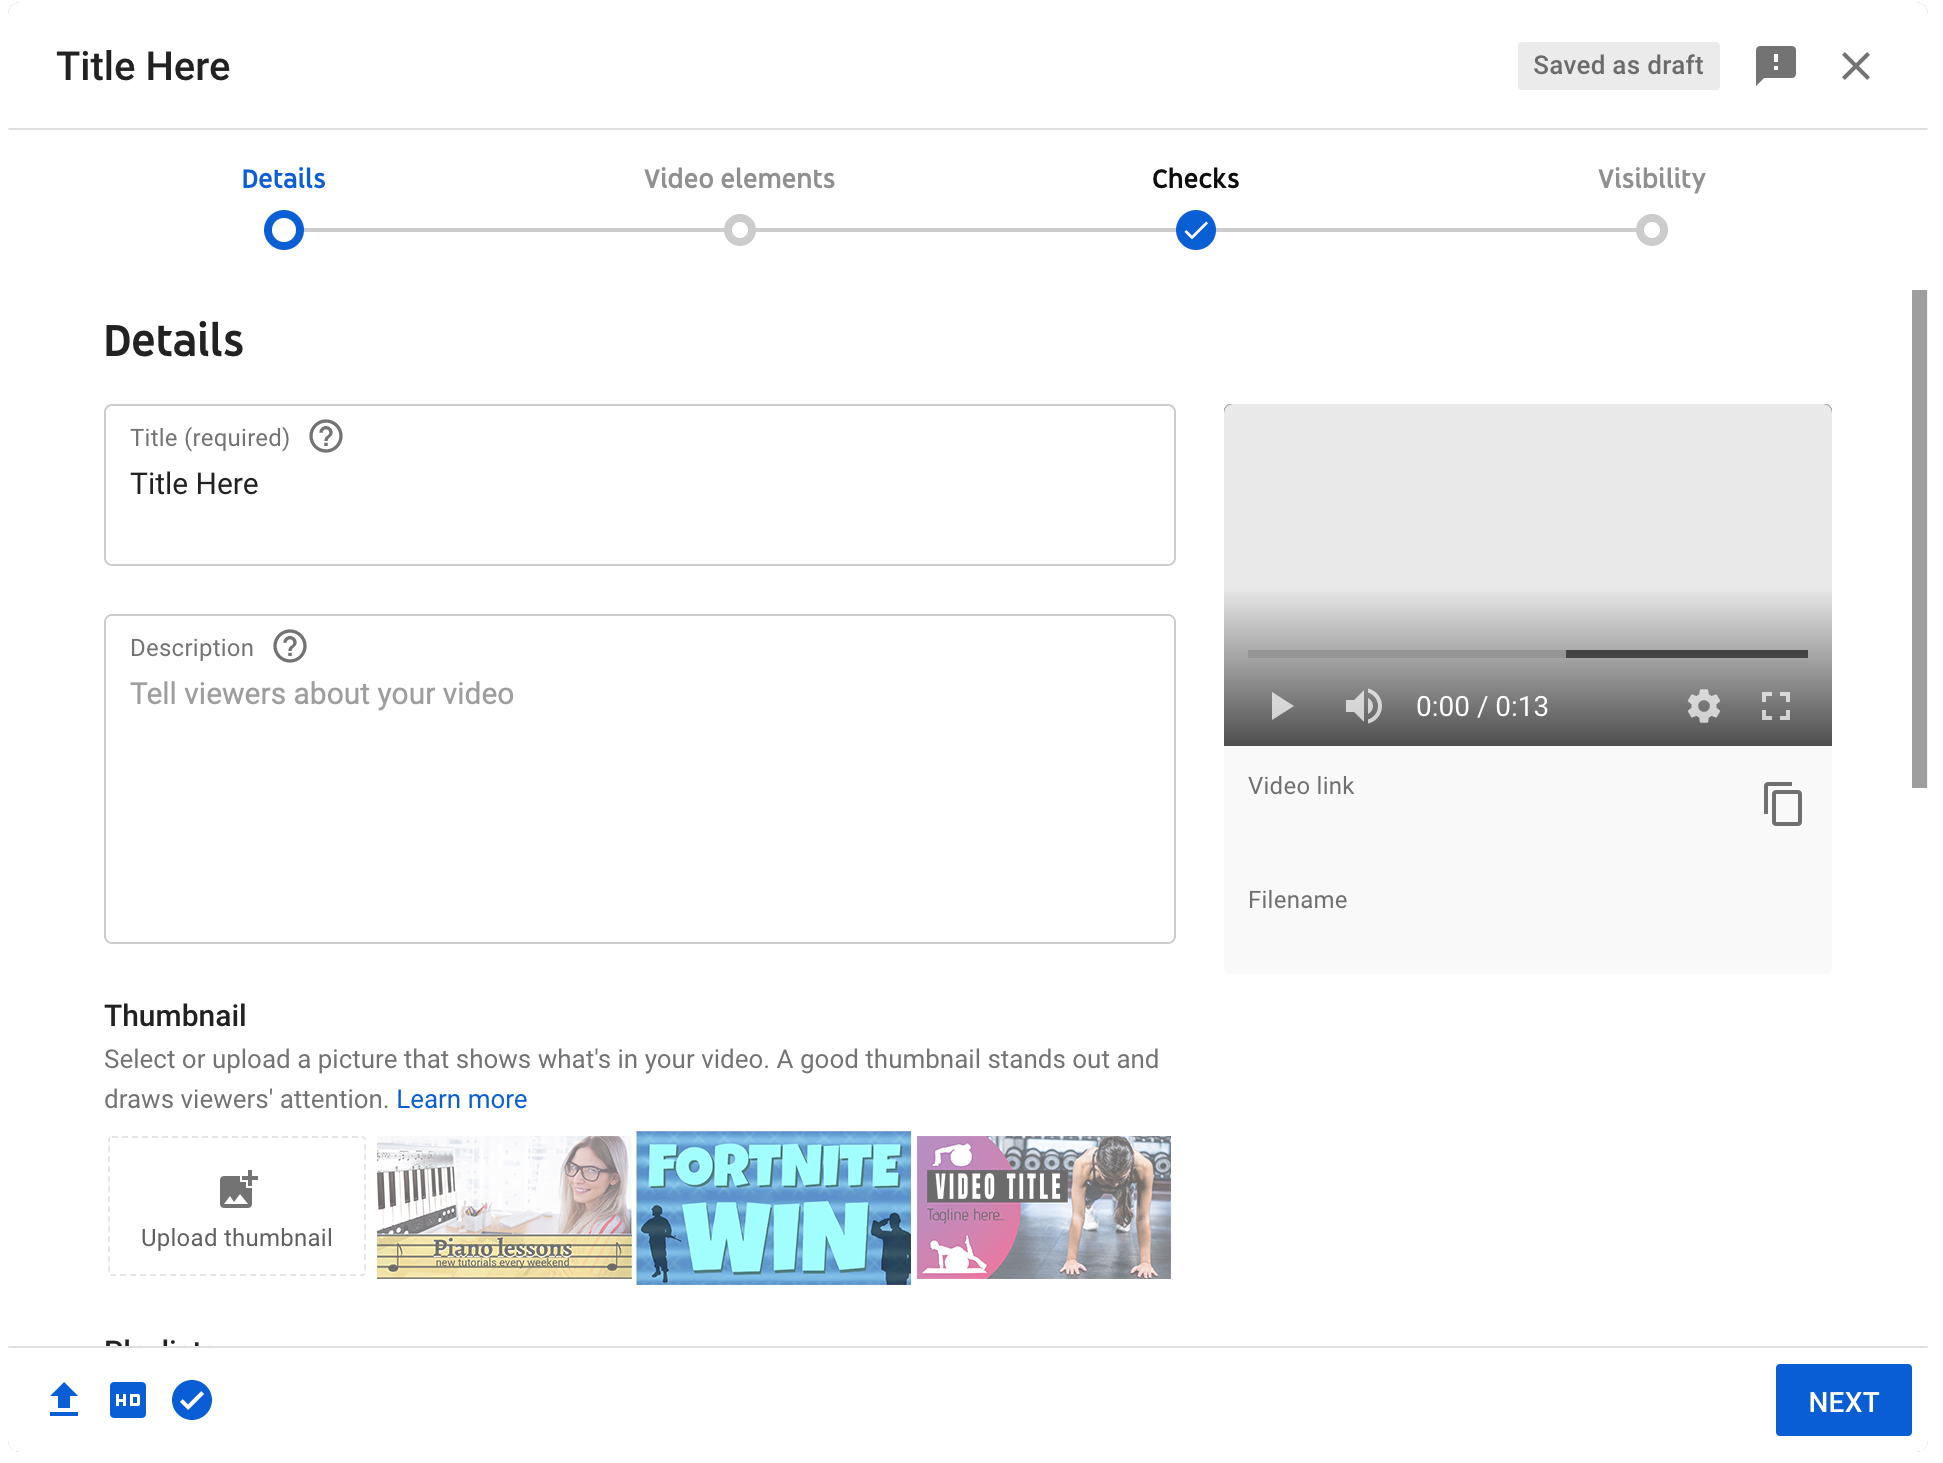 Page for creating a new video on YouTube - Step-by-step guide to designing YouTube thumbnails - Image